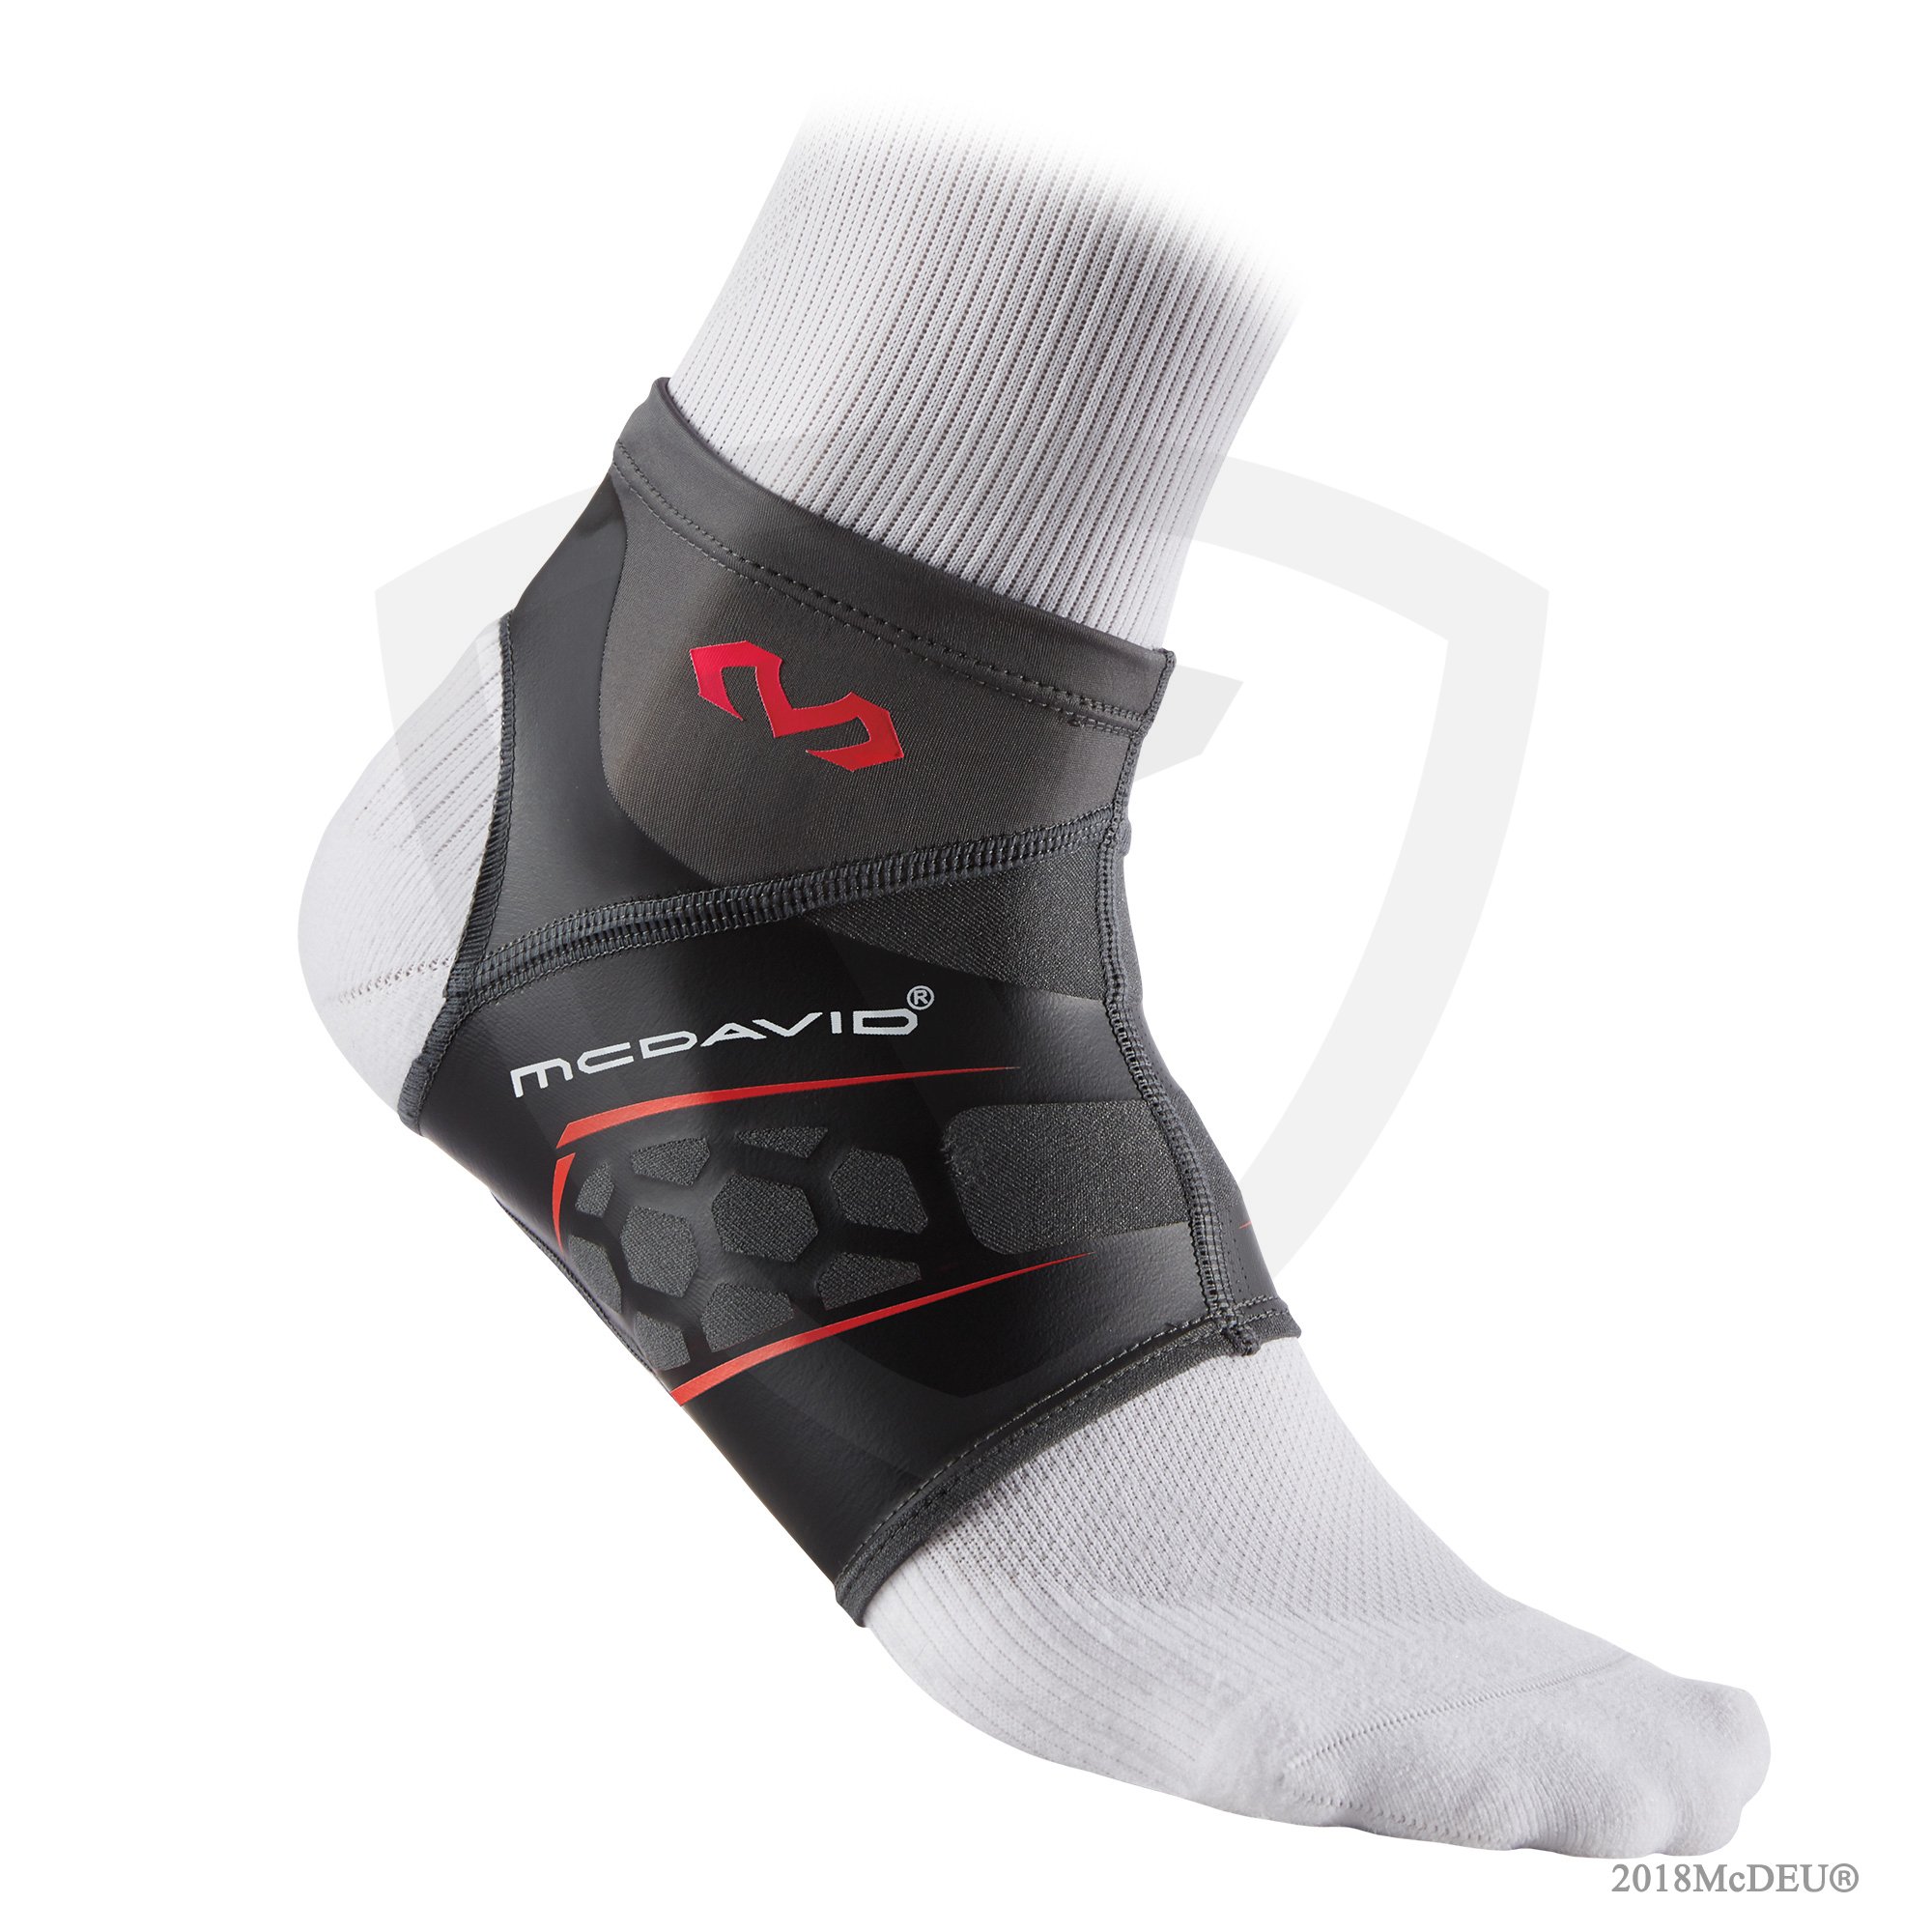 McDavid 4101 Runners Therapy Plantar Fasciitis Sleeve RIGHT XL